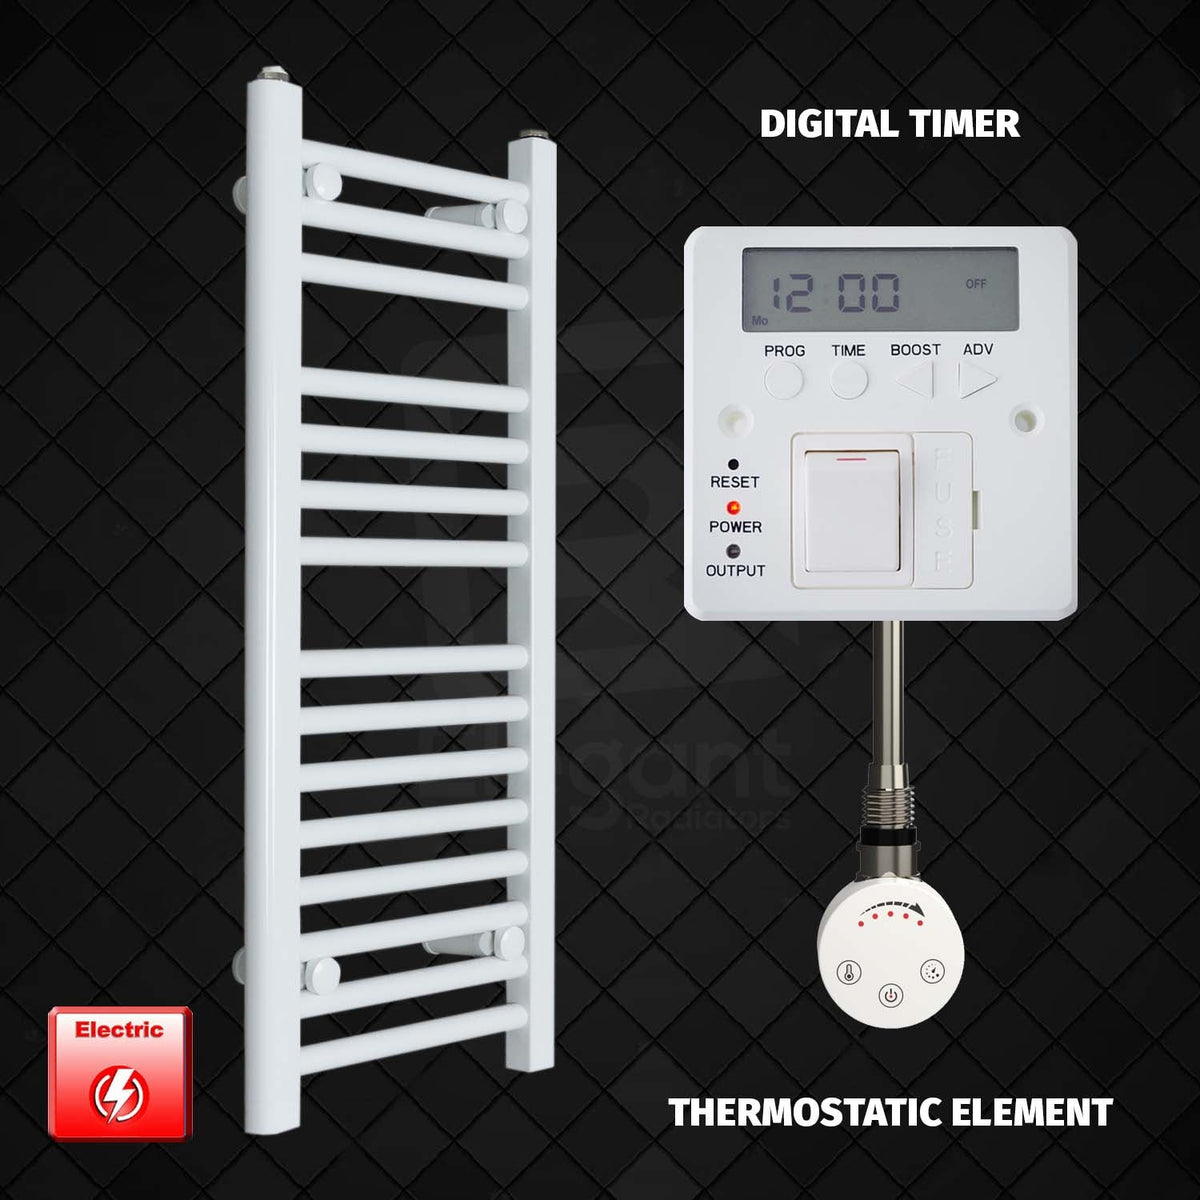 800 x 300 Pre-Filled Electric Heated Towel Rail Radiator White HTR Smart Digital Timer Thermostatic Element